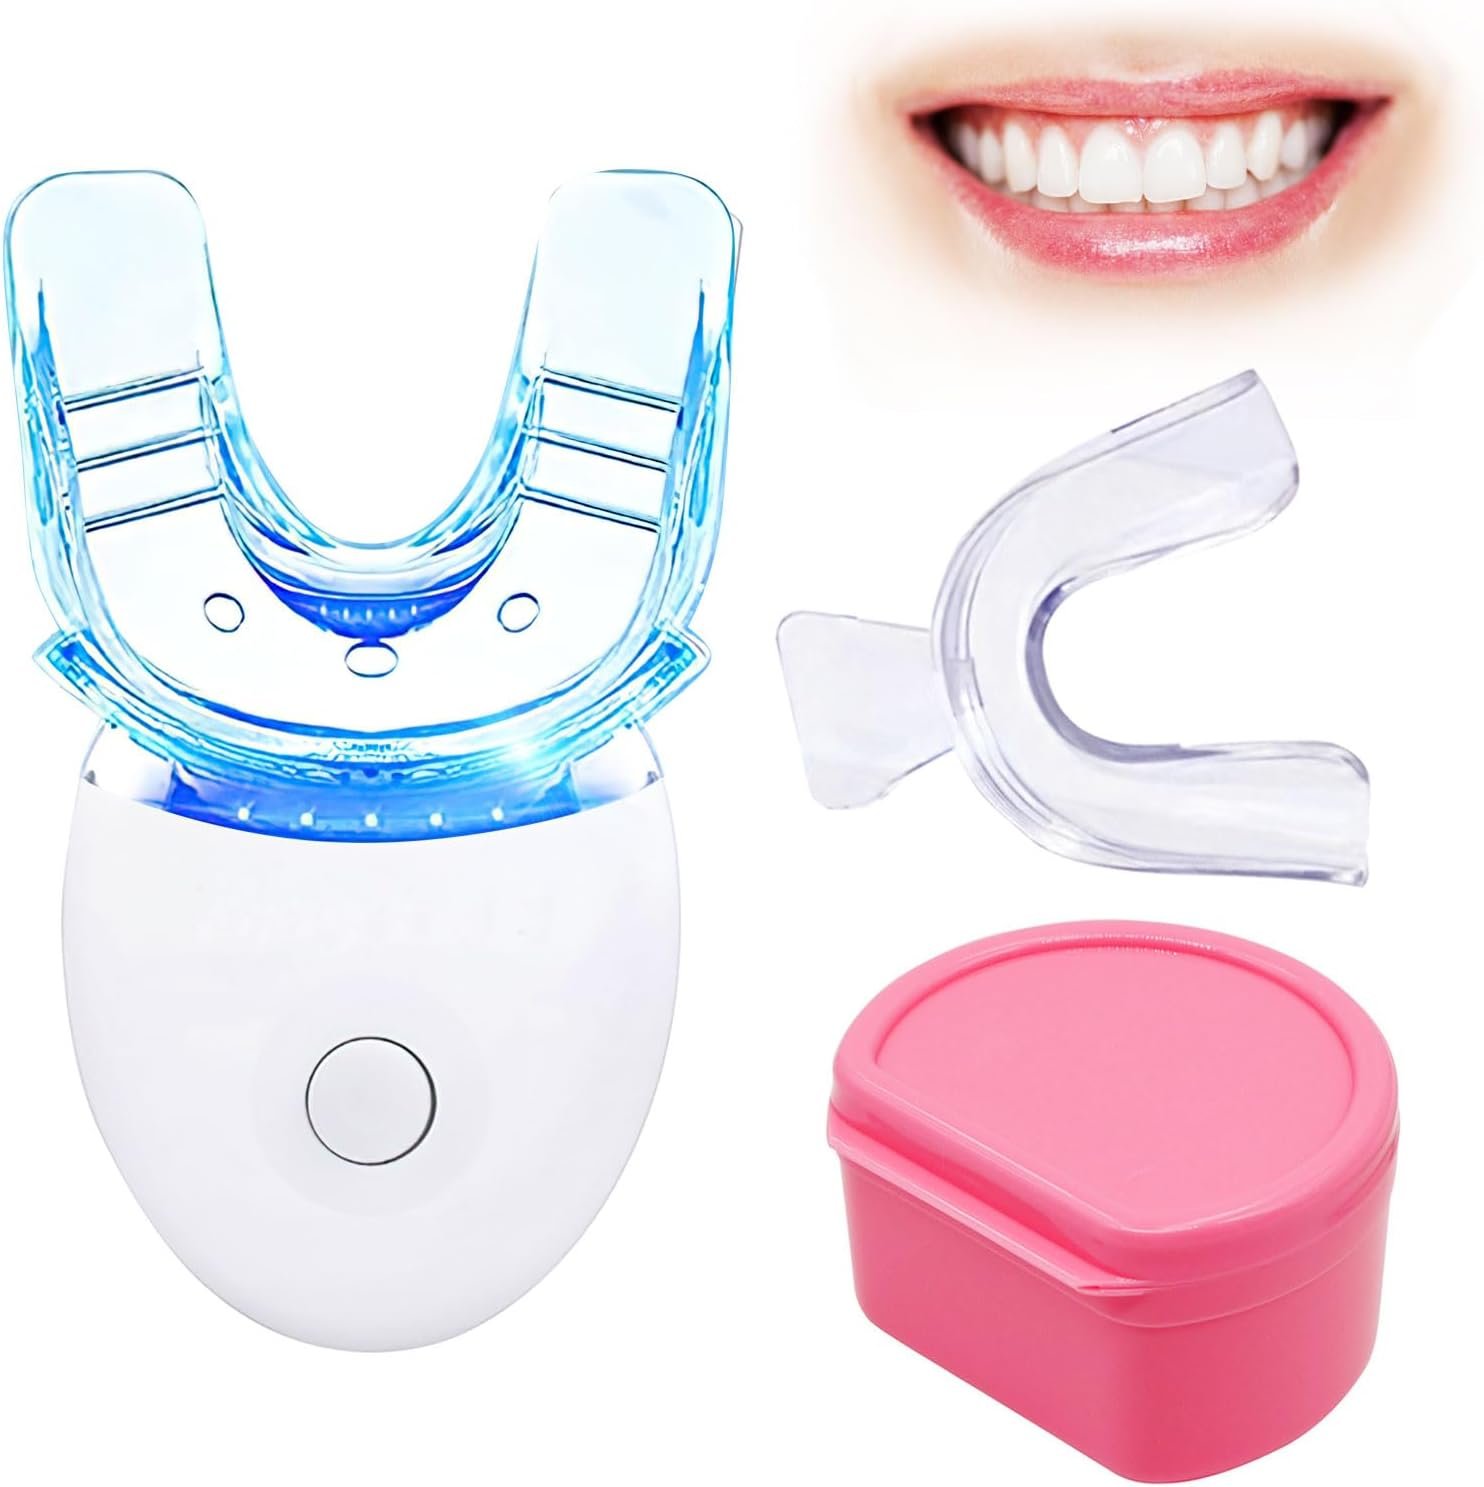 Teeth Whitening Accelerator Light, with Mouth Tray and Case, 5 Blue LED Teeth Whitening Light,Wireless Teeth whitening LED Light | White